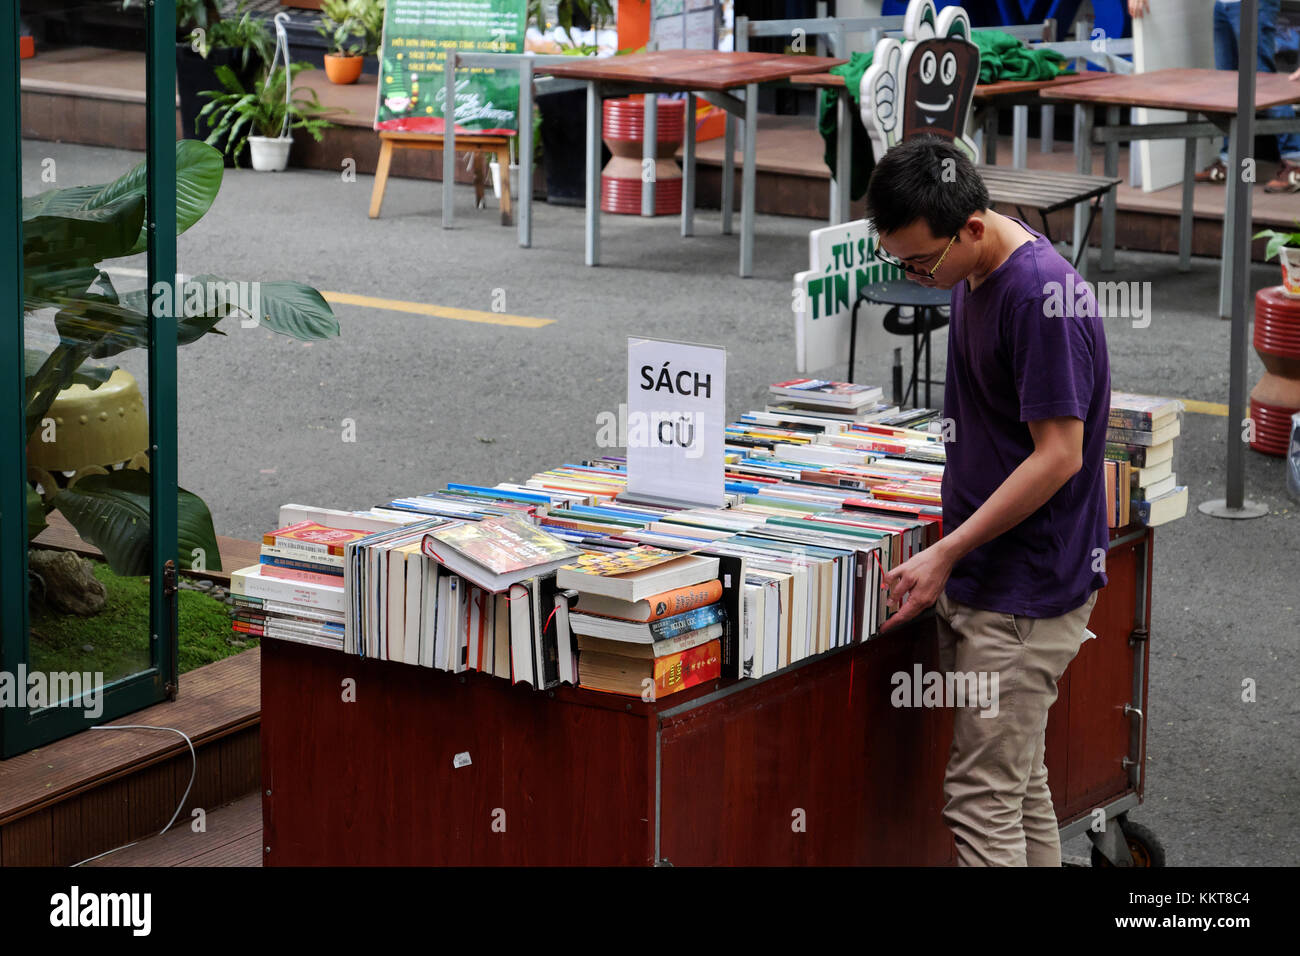 HO CHI MINH, VIET NAm, Reader reading book at bookstore, publishing company show colorful books outdoor of shop, reading lost in modern society Stock Photo